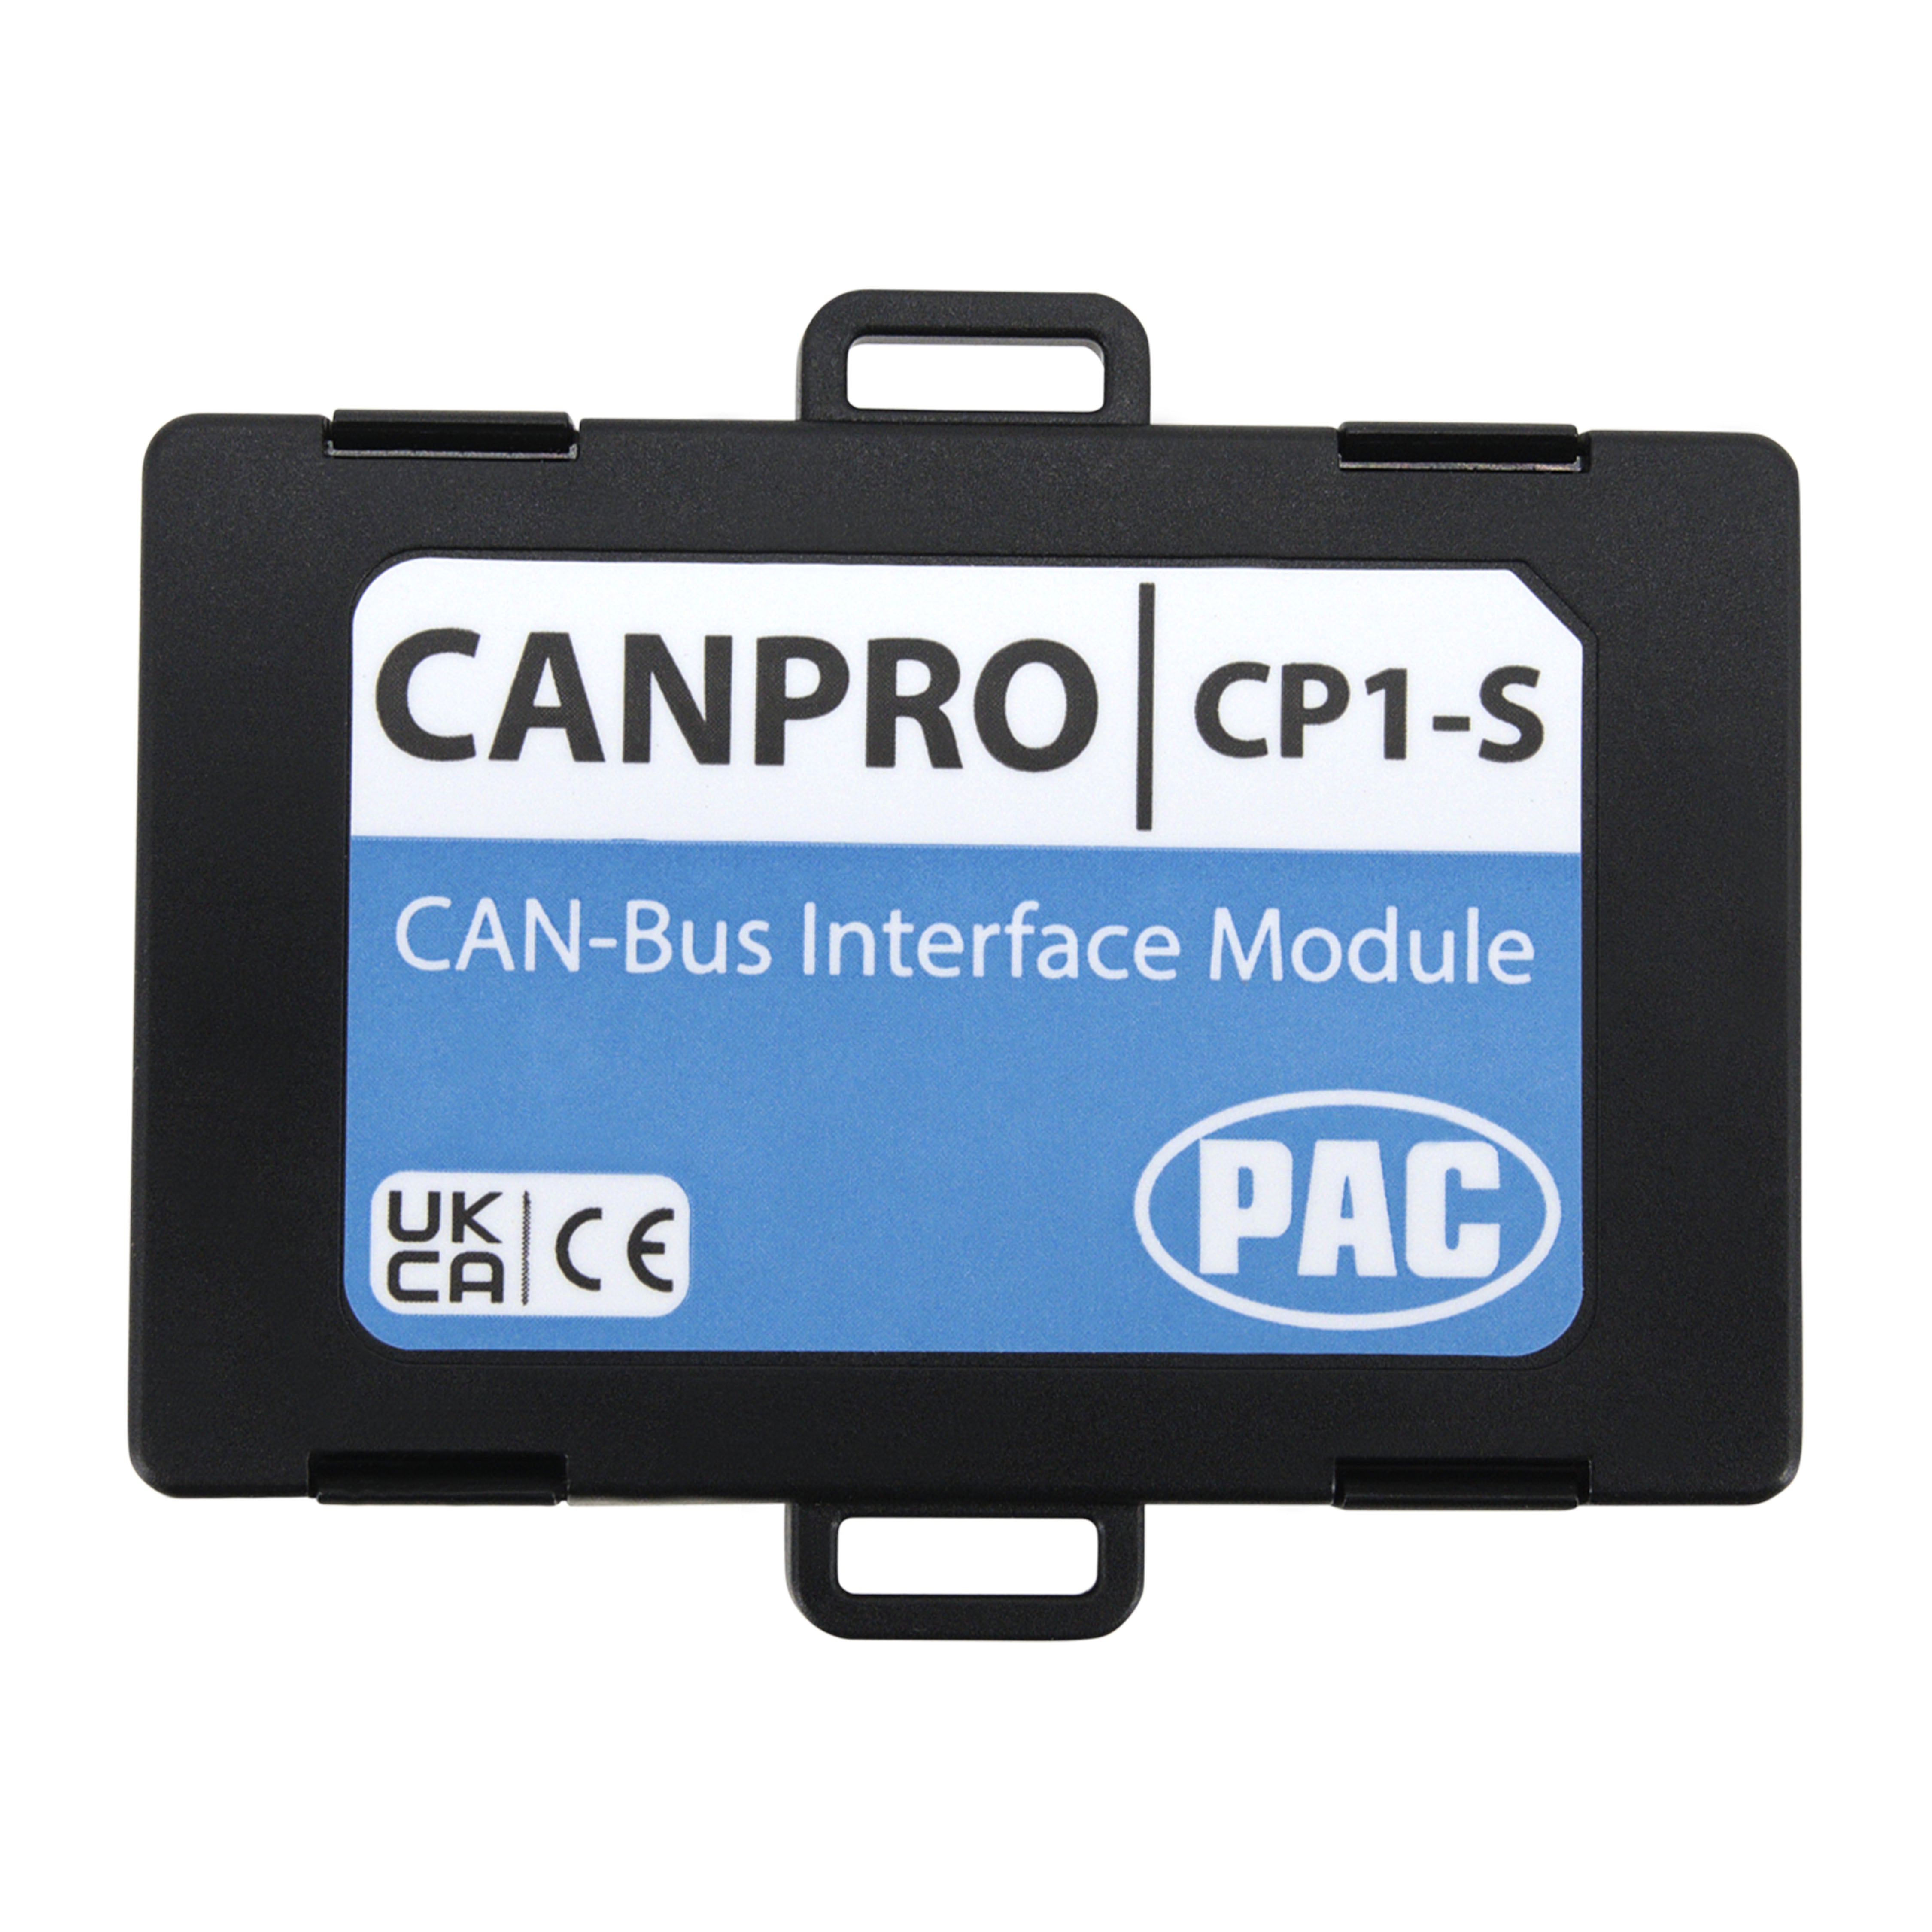 PAC CP1-S, CAN-Bus Interface Trigger Module for Connecting Aftermarket Accessories